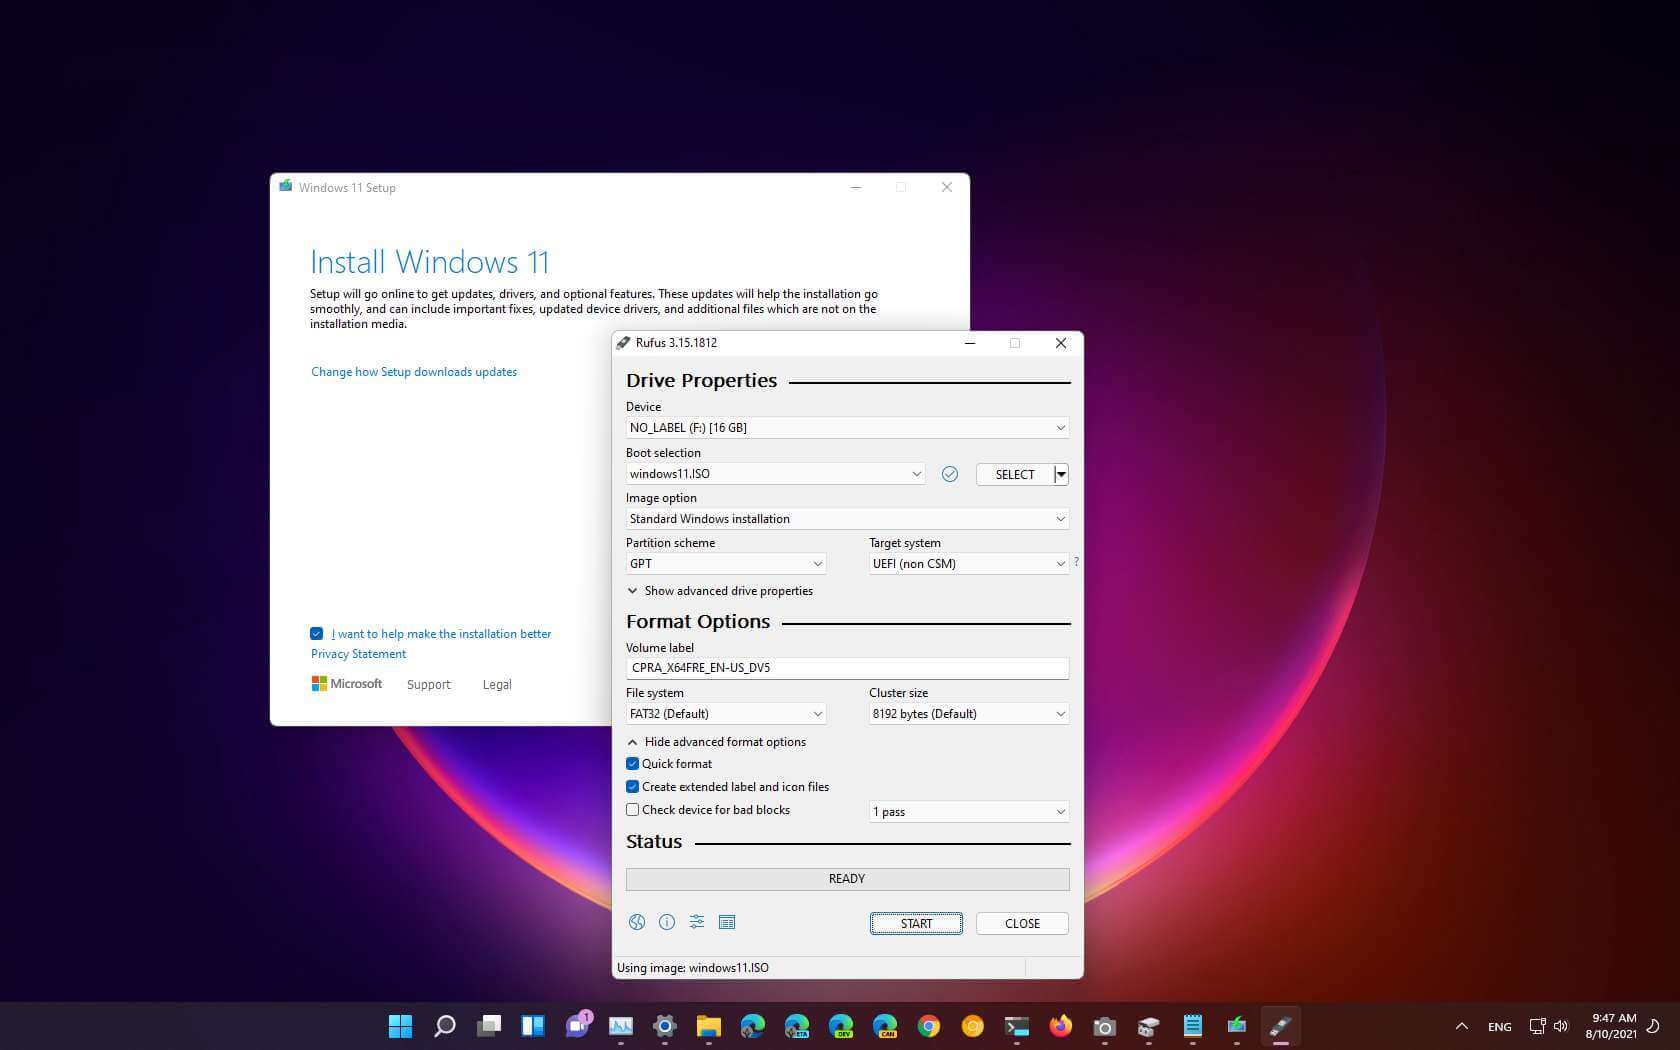 lugt Tempel fax How to create bootable Windows 11 USB install media - Pureinfotech